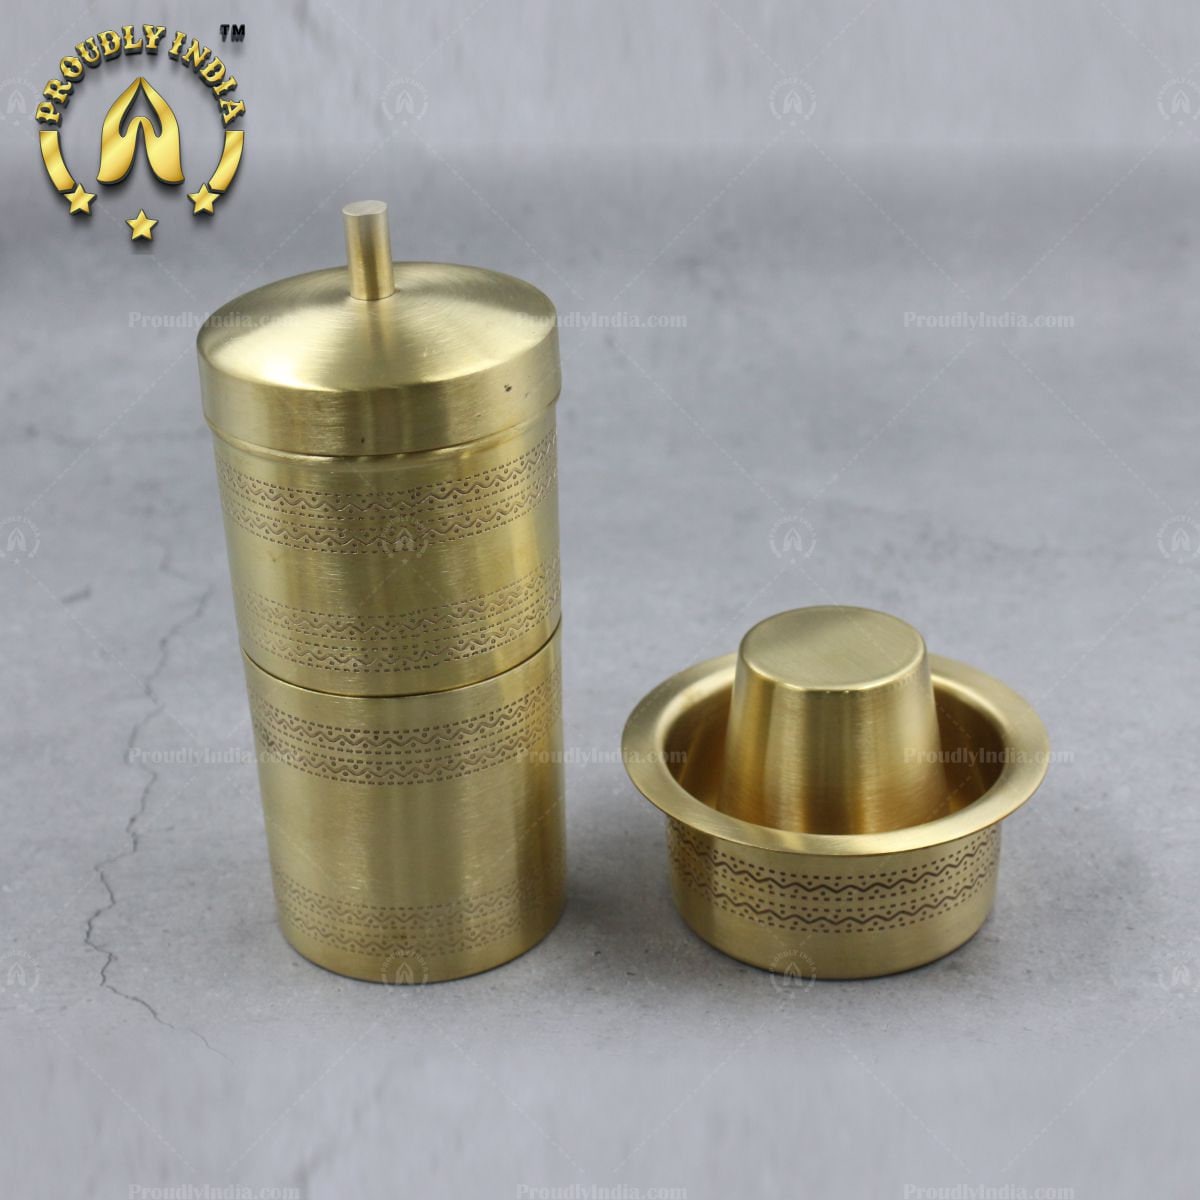 Brass Coffee Filter & Dabara Set: Buy Traditional Metal Drip Holder Online  for Authentic Filter Coffee Experience